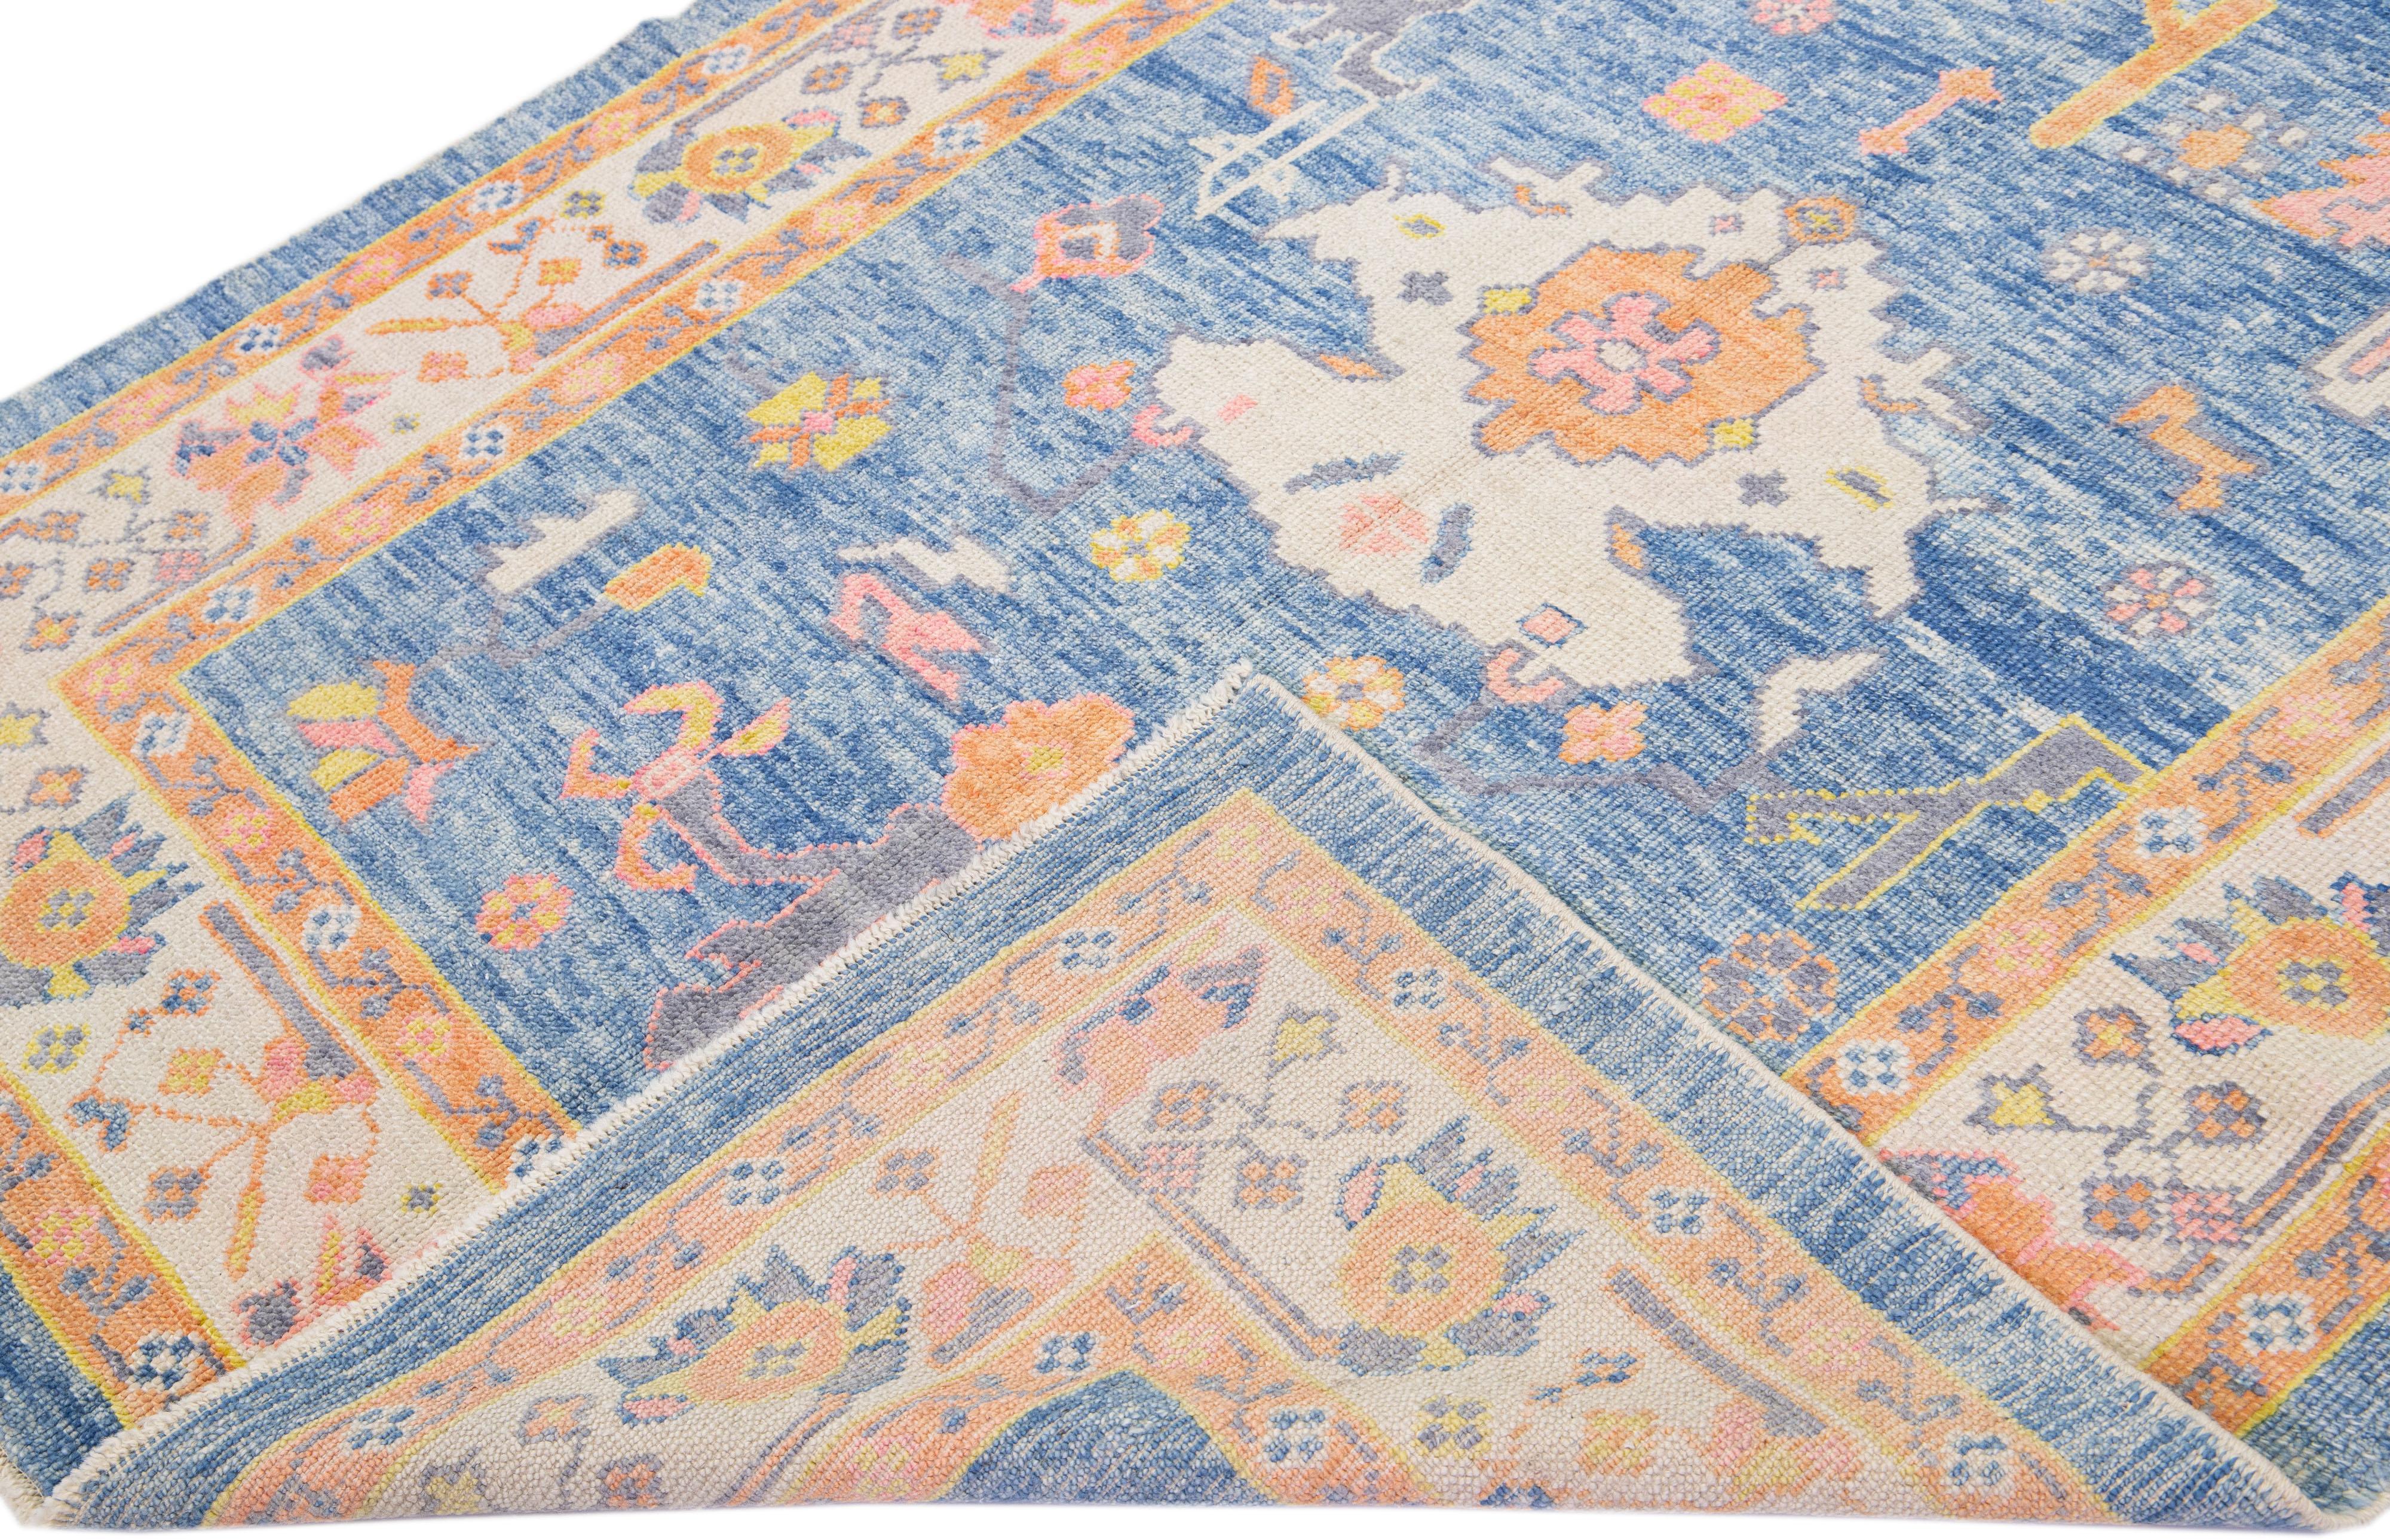 Beautiful modern Oushak hand-knotted wool rug with a navy blue color field. This Turkish Piece has a beige frame with yellow, orange, pink, and green accent colors in a gorgeous all-over floral design.

This rug measures: 5'9